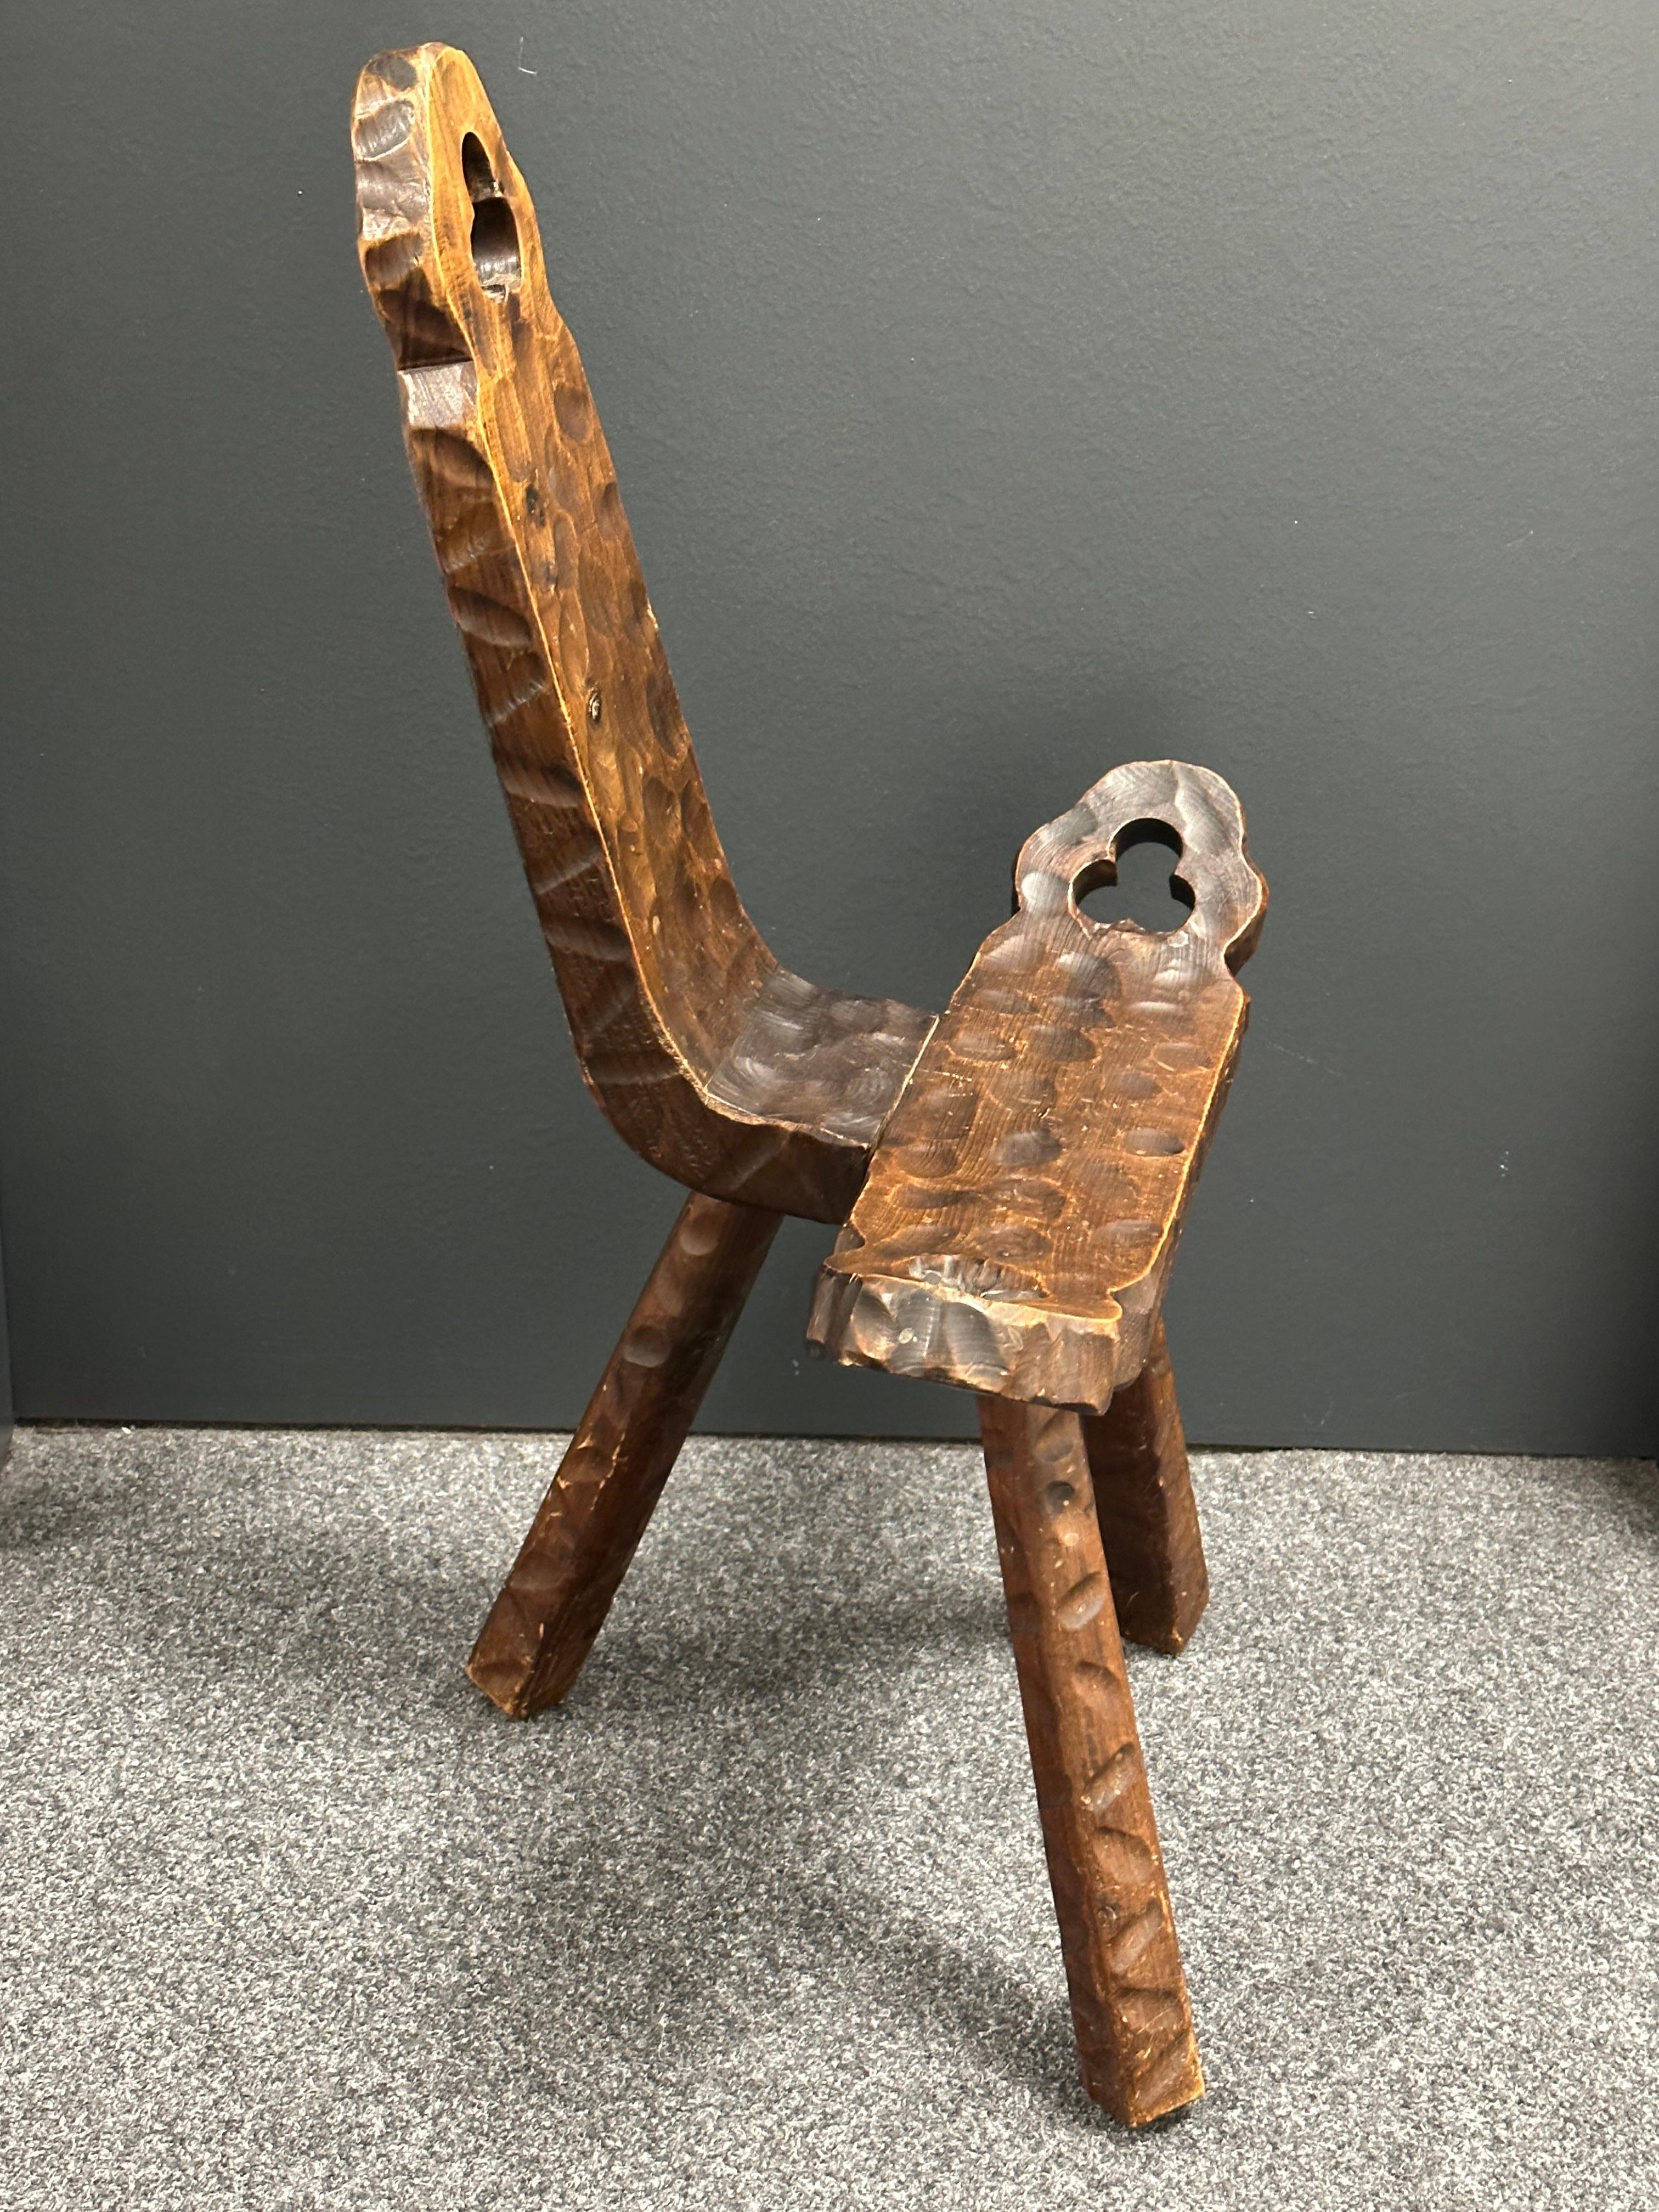 Late 20th Century Mid-Century Modern Brutalist Sculptural Wood Tripod Chair, Spain Vintage 1970s For Sale